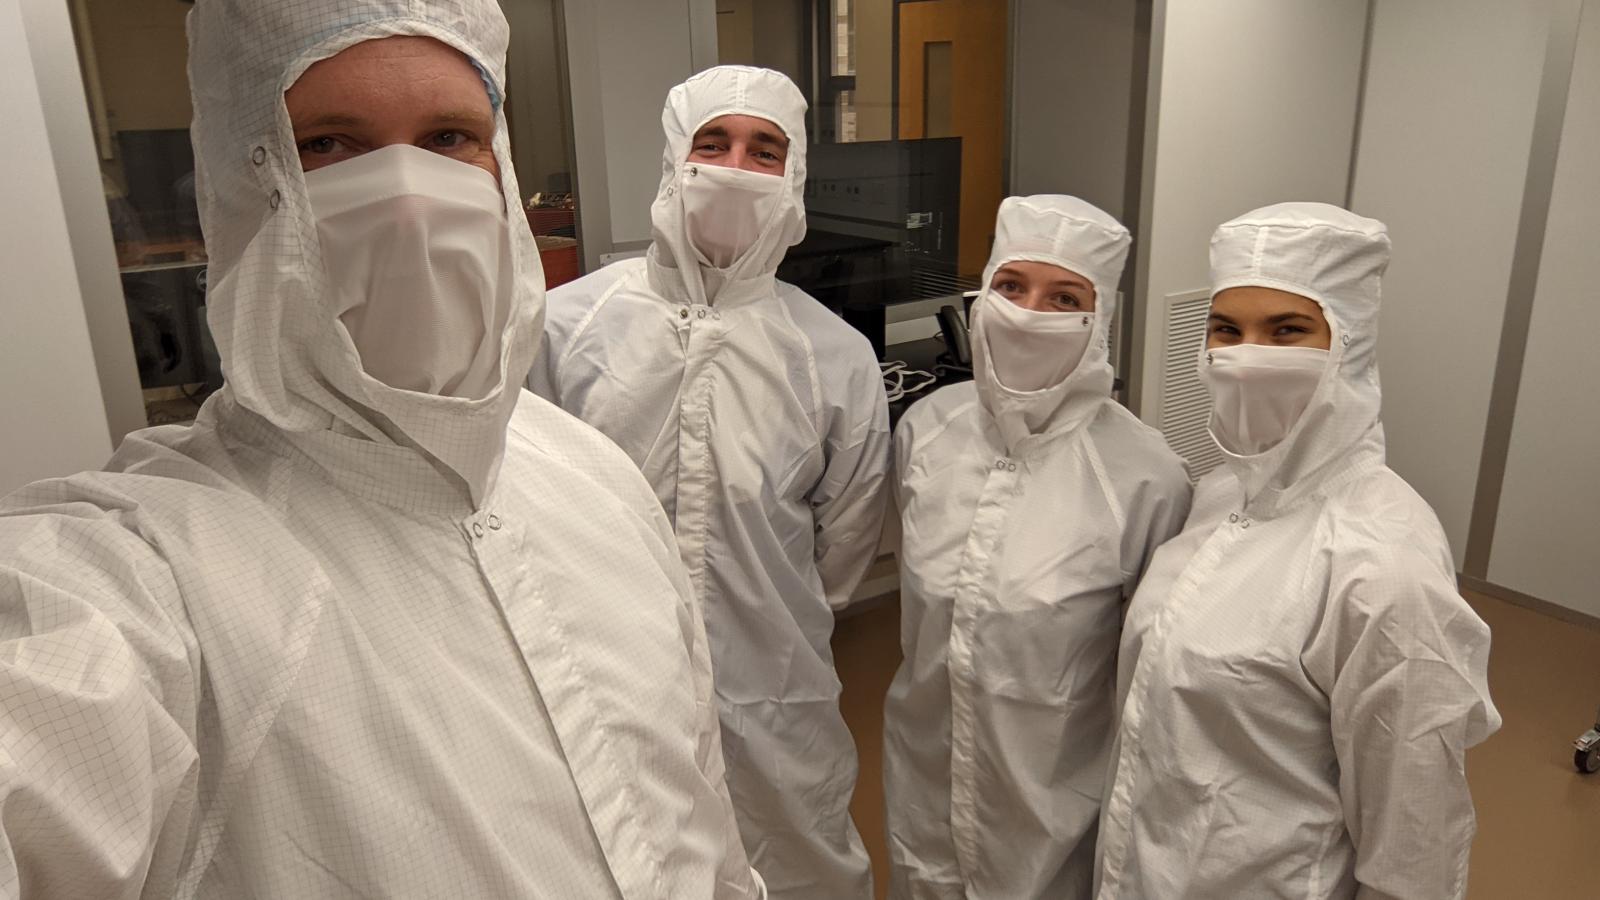 The iLocater team working on instrument development in a cleanroom environment